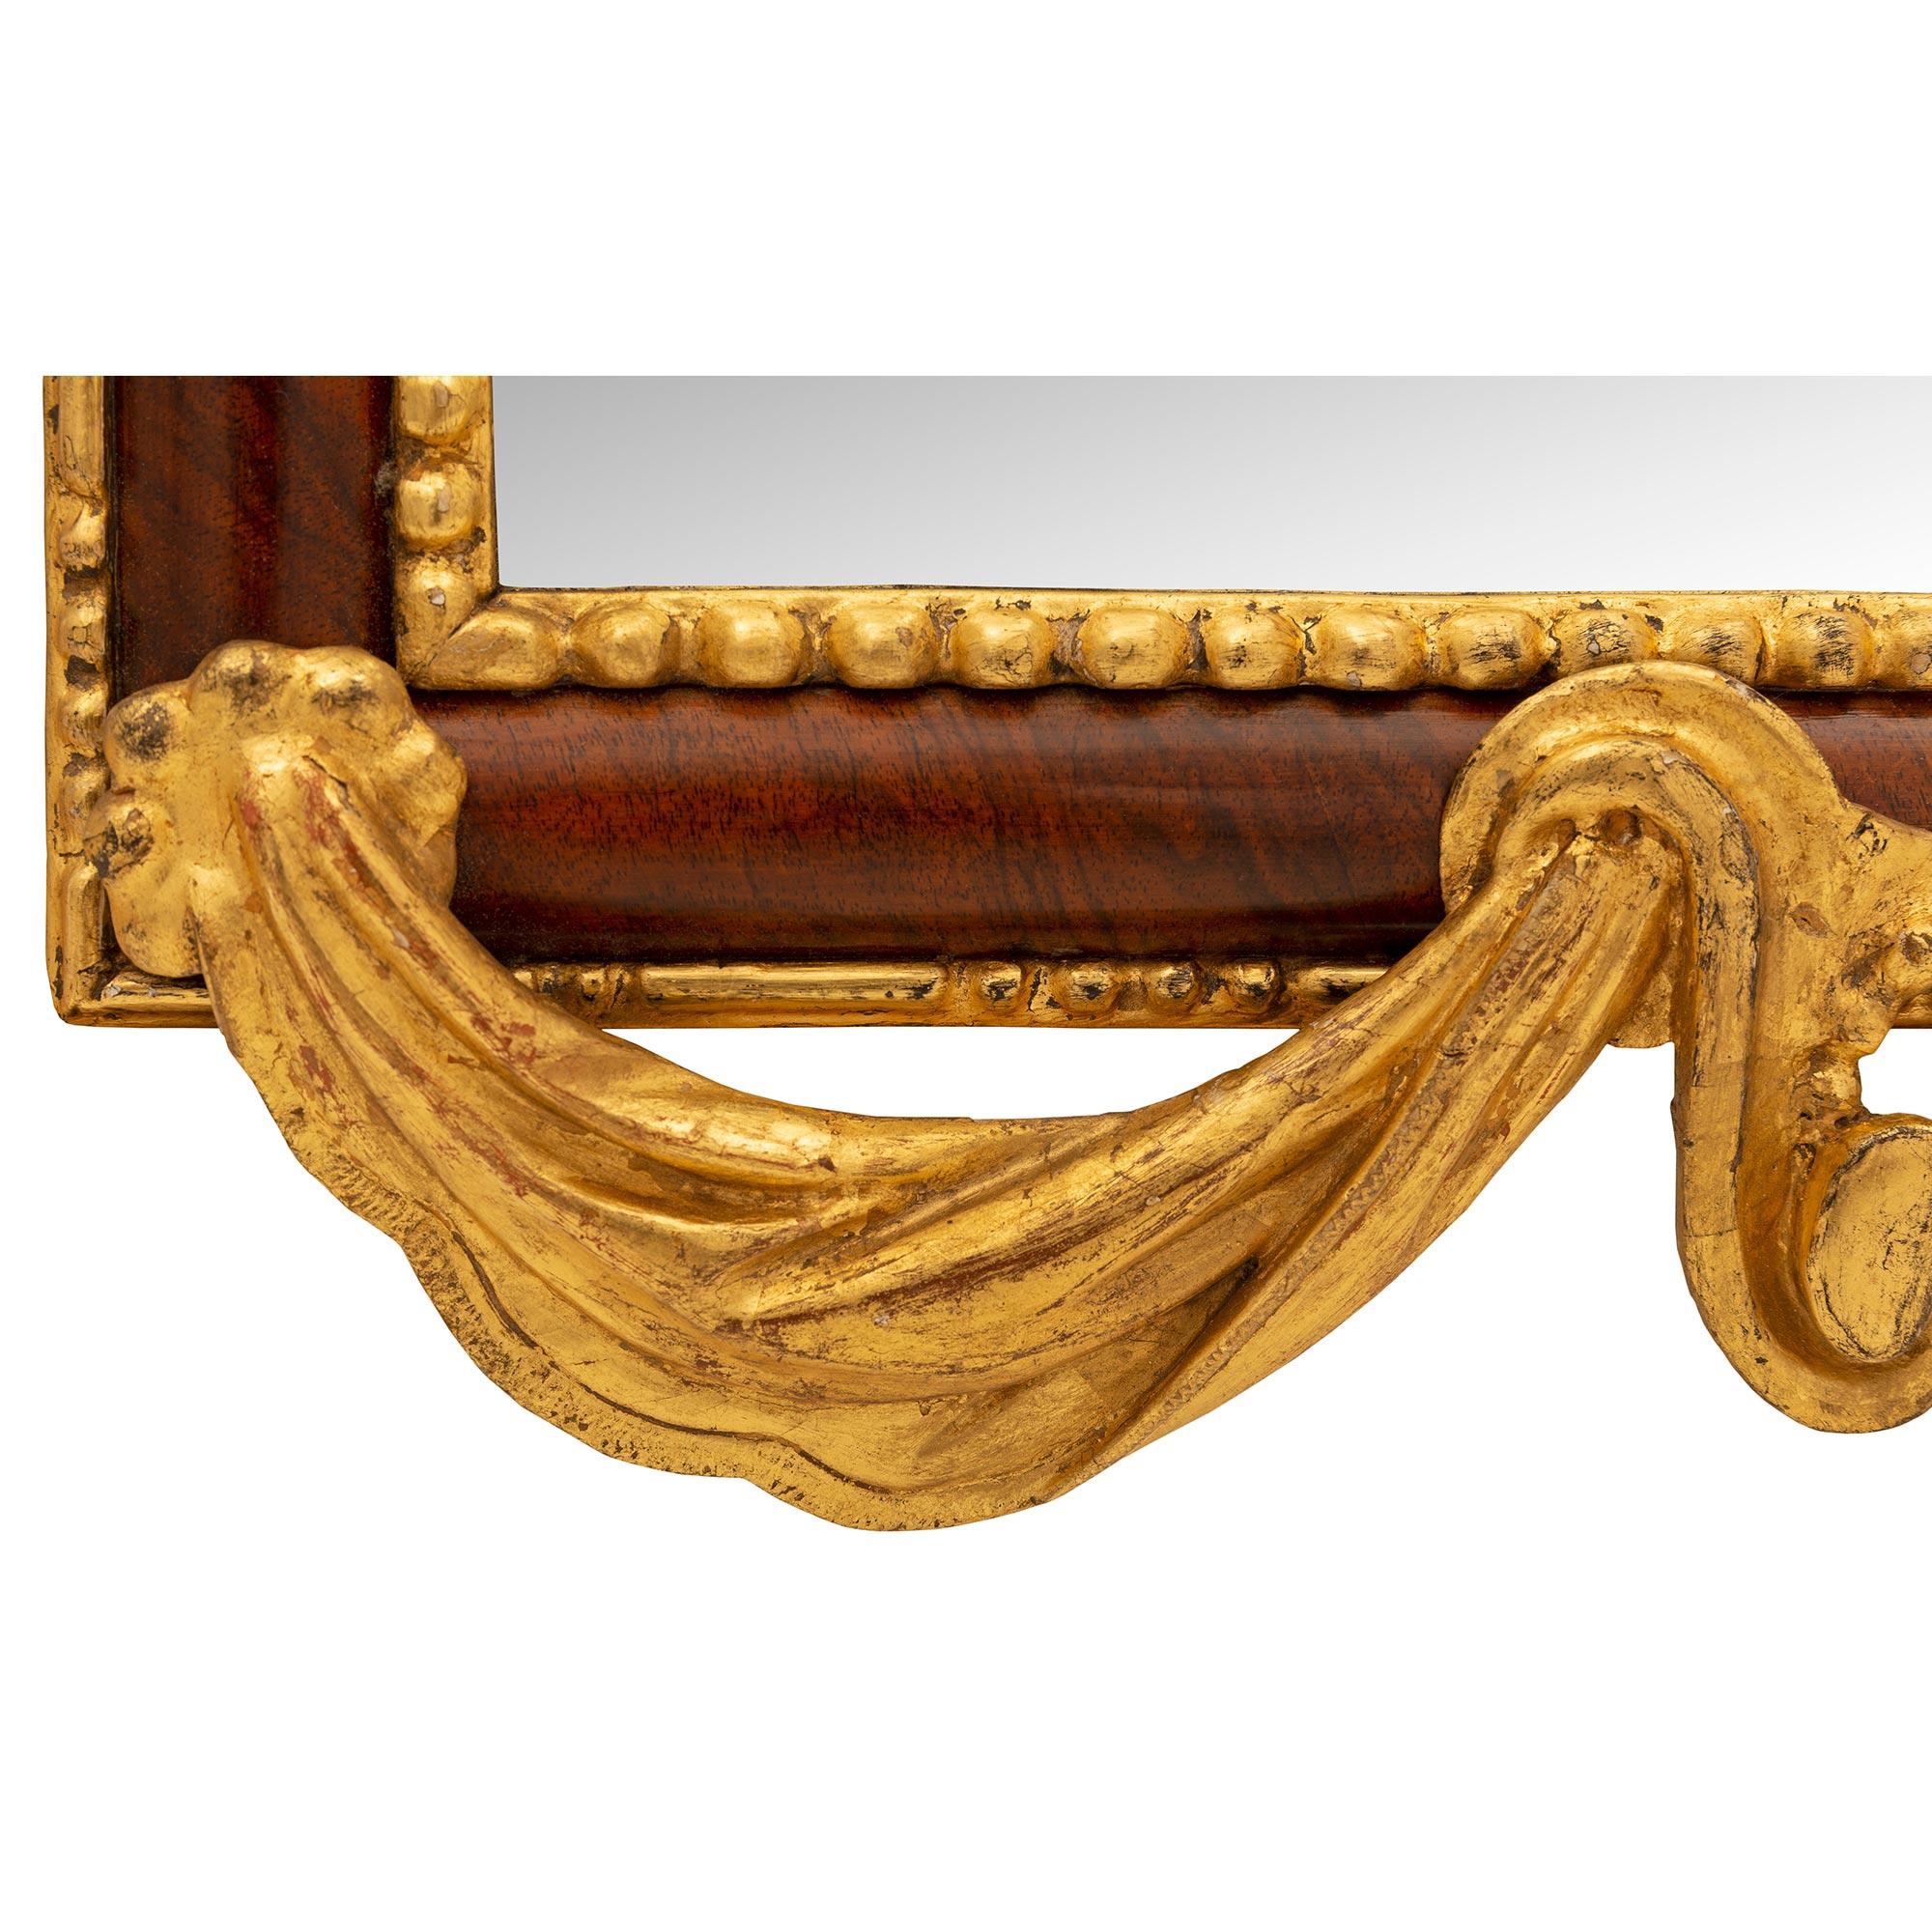 German 18th Century Neo-Classical Period Burl Walnut, Giltwood and Mecca Mirror For Sale 1